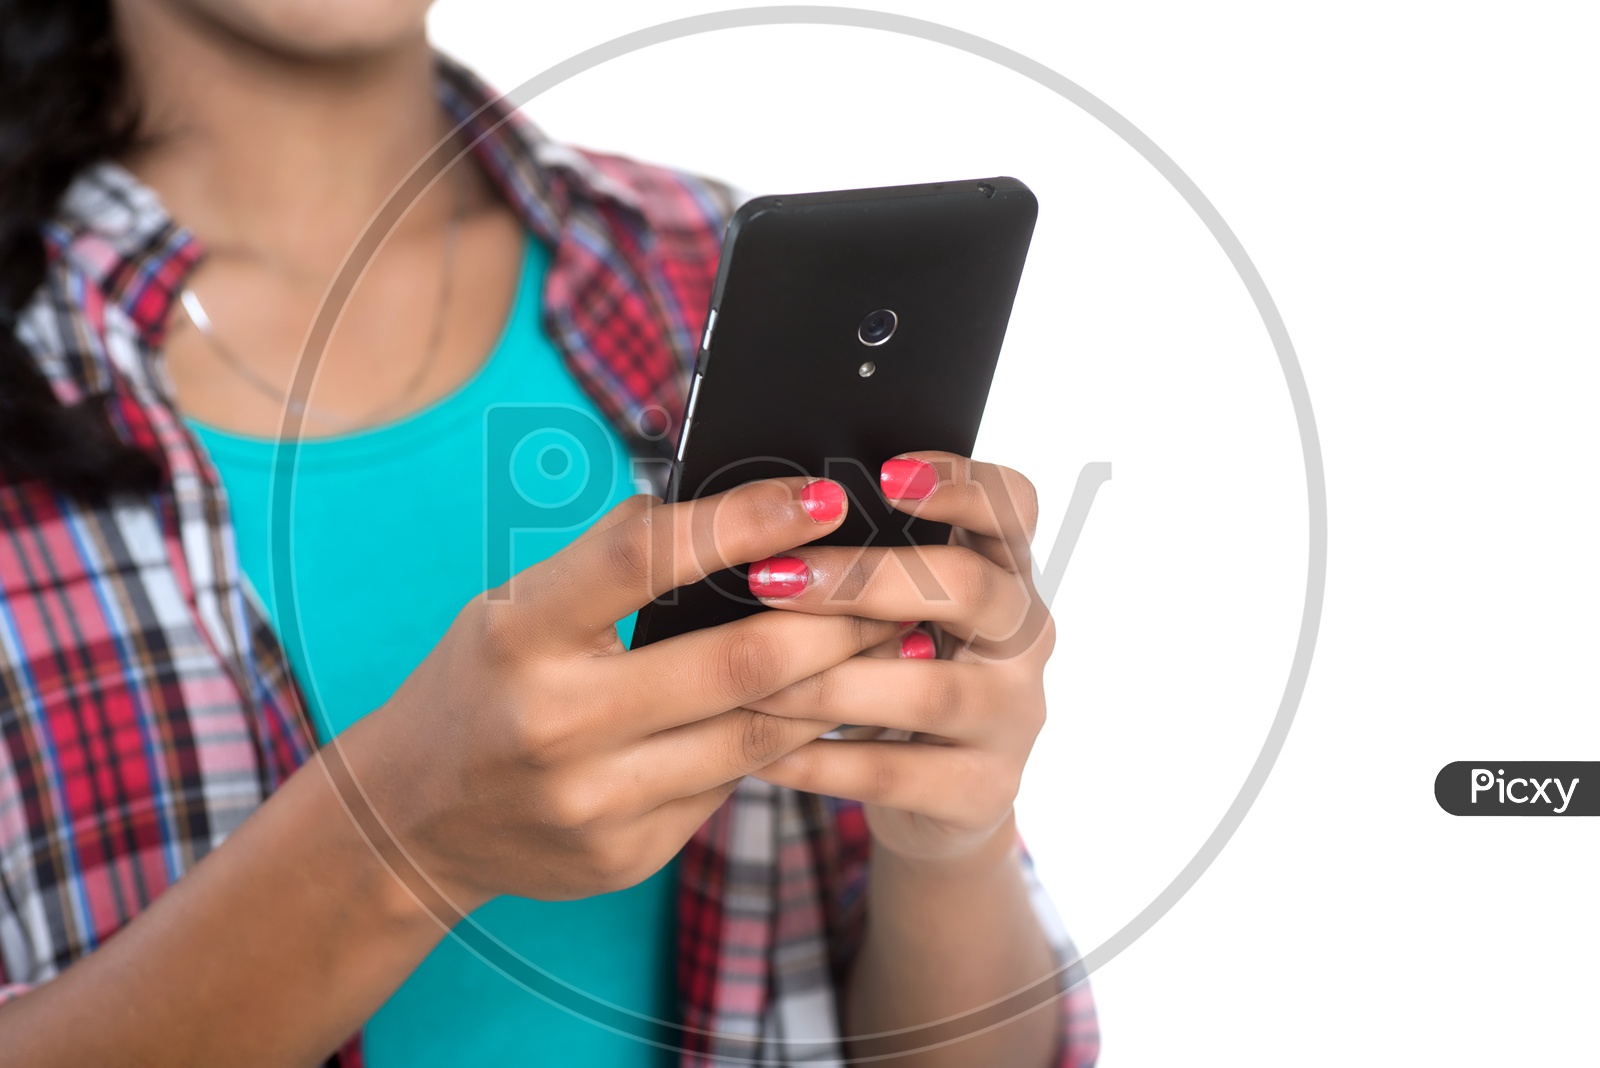 Young Indian Girl Using Smart Phone On an Isolated White Background